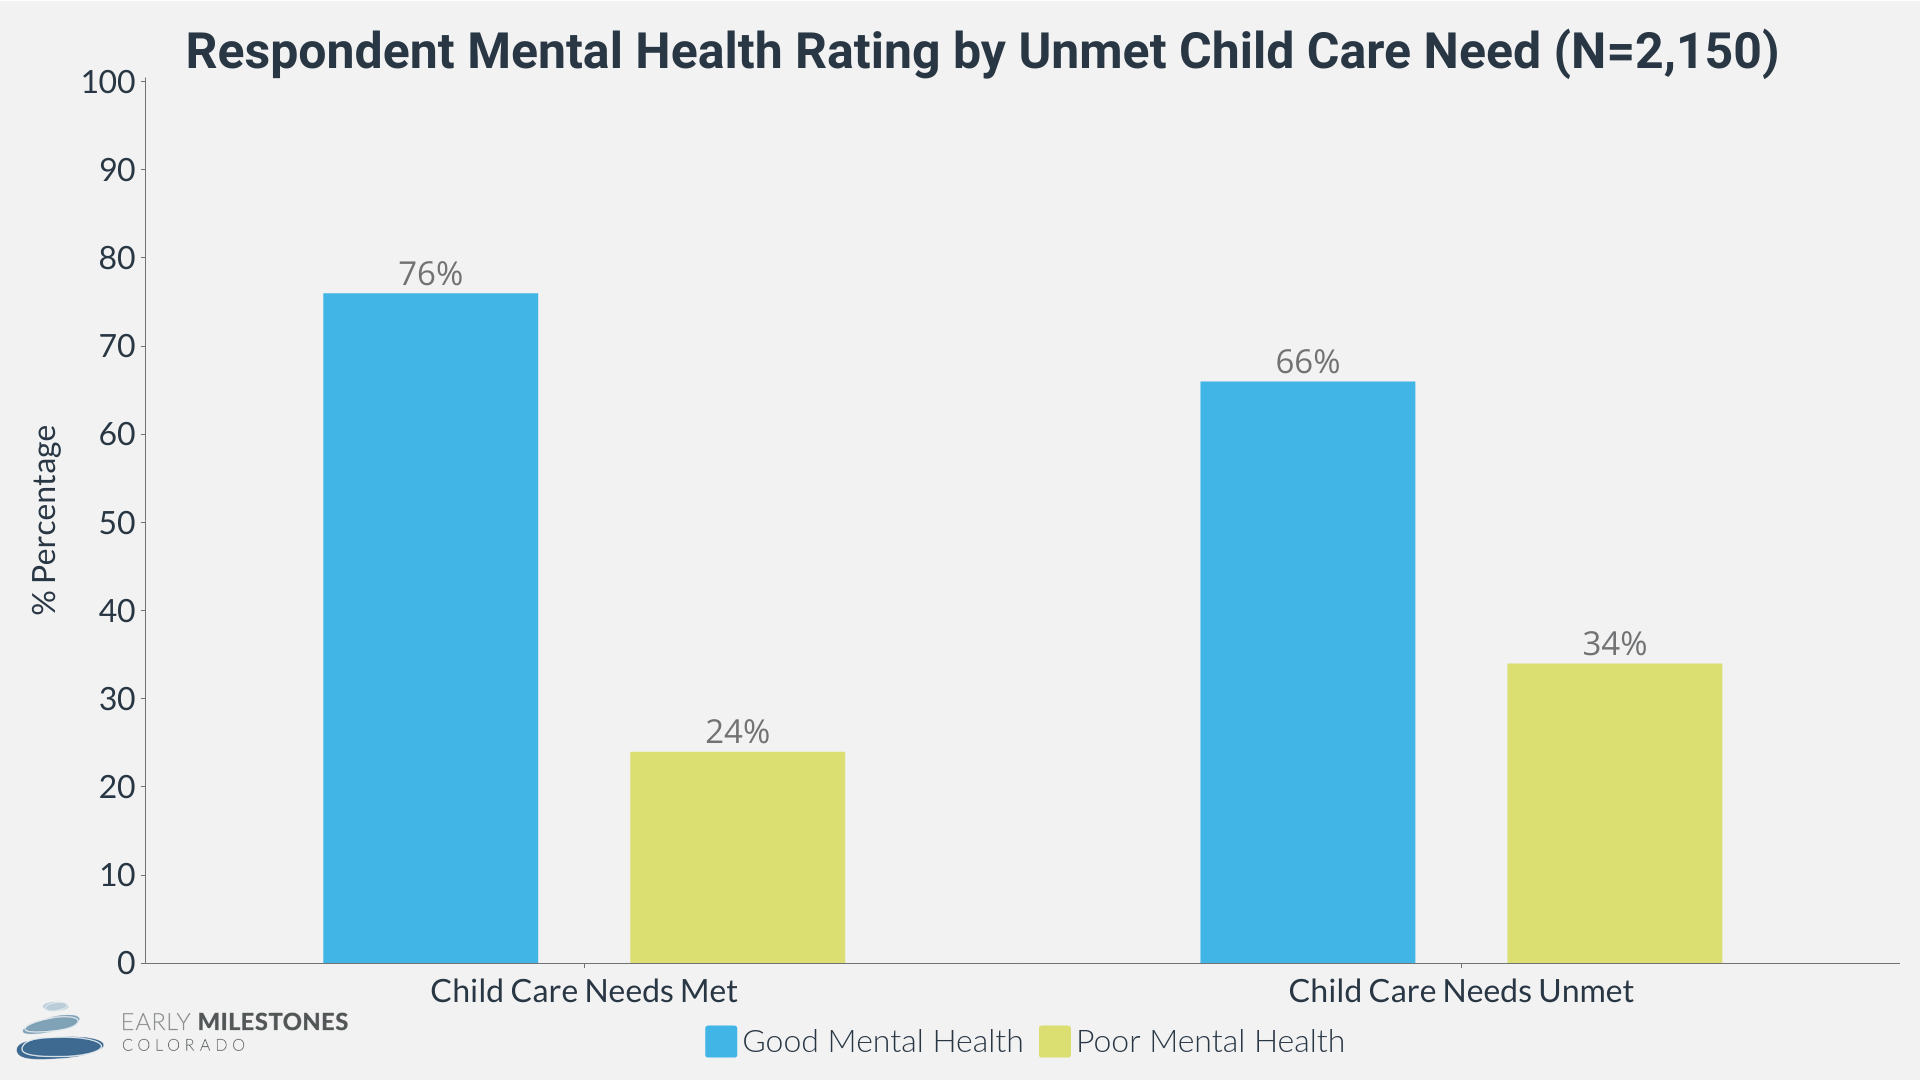 Bar chart showing percentage of families with unmet child care needs versus met child care needs. Described under the heading Respondent Mental Health Rating by Unmet Child Care Need.